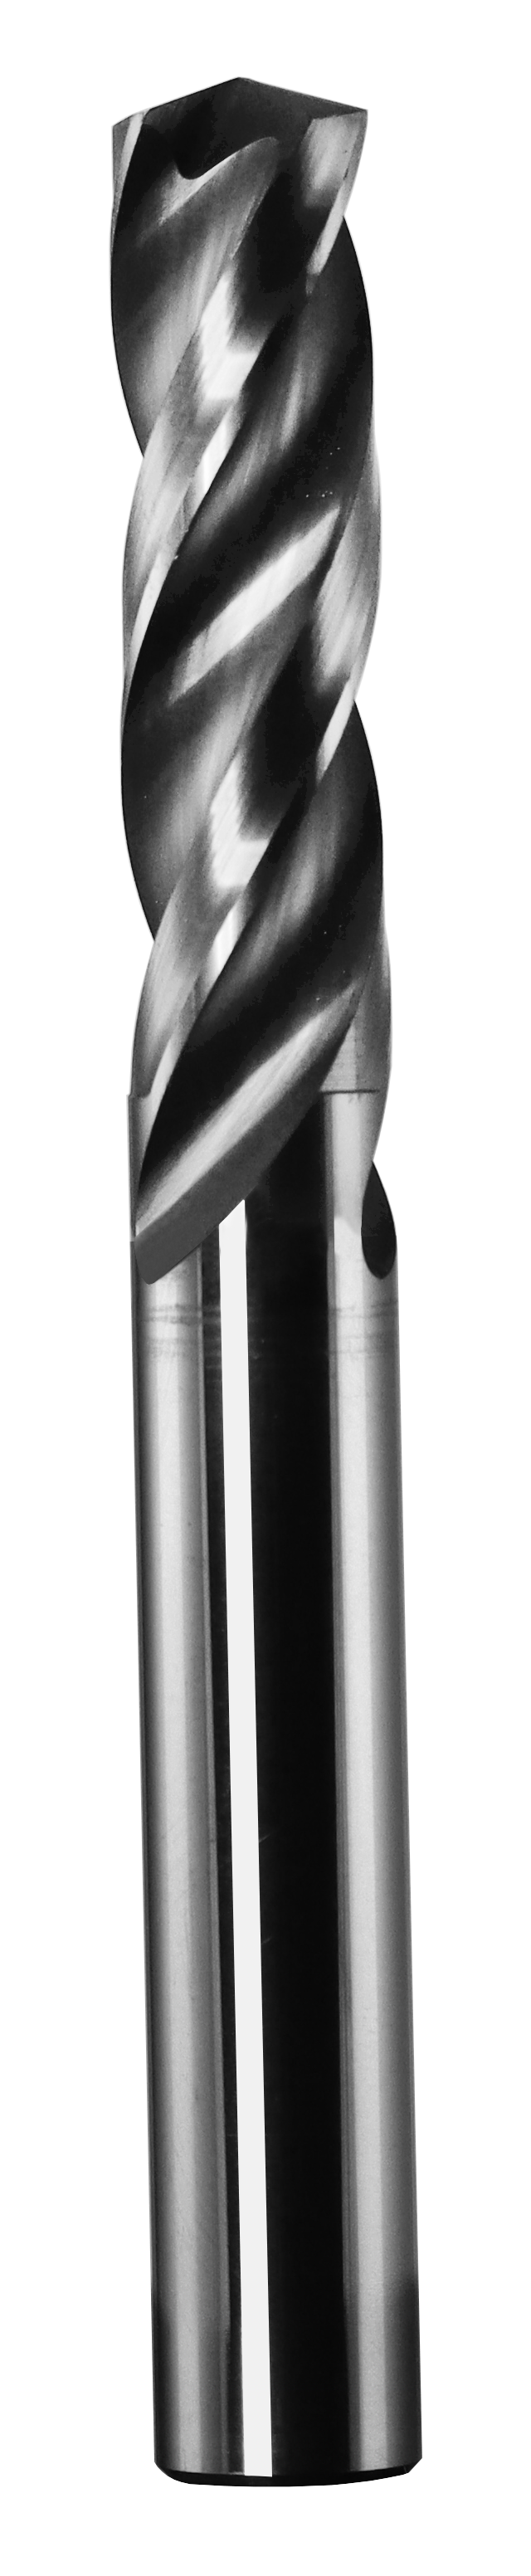 5.10mm Dia, 150 Degree Point, Solid Carbide Drill - 63057